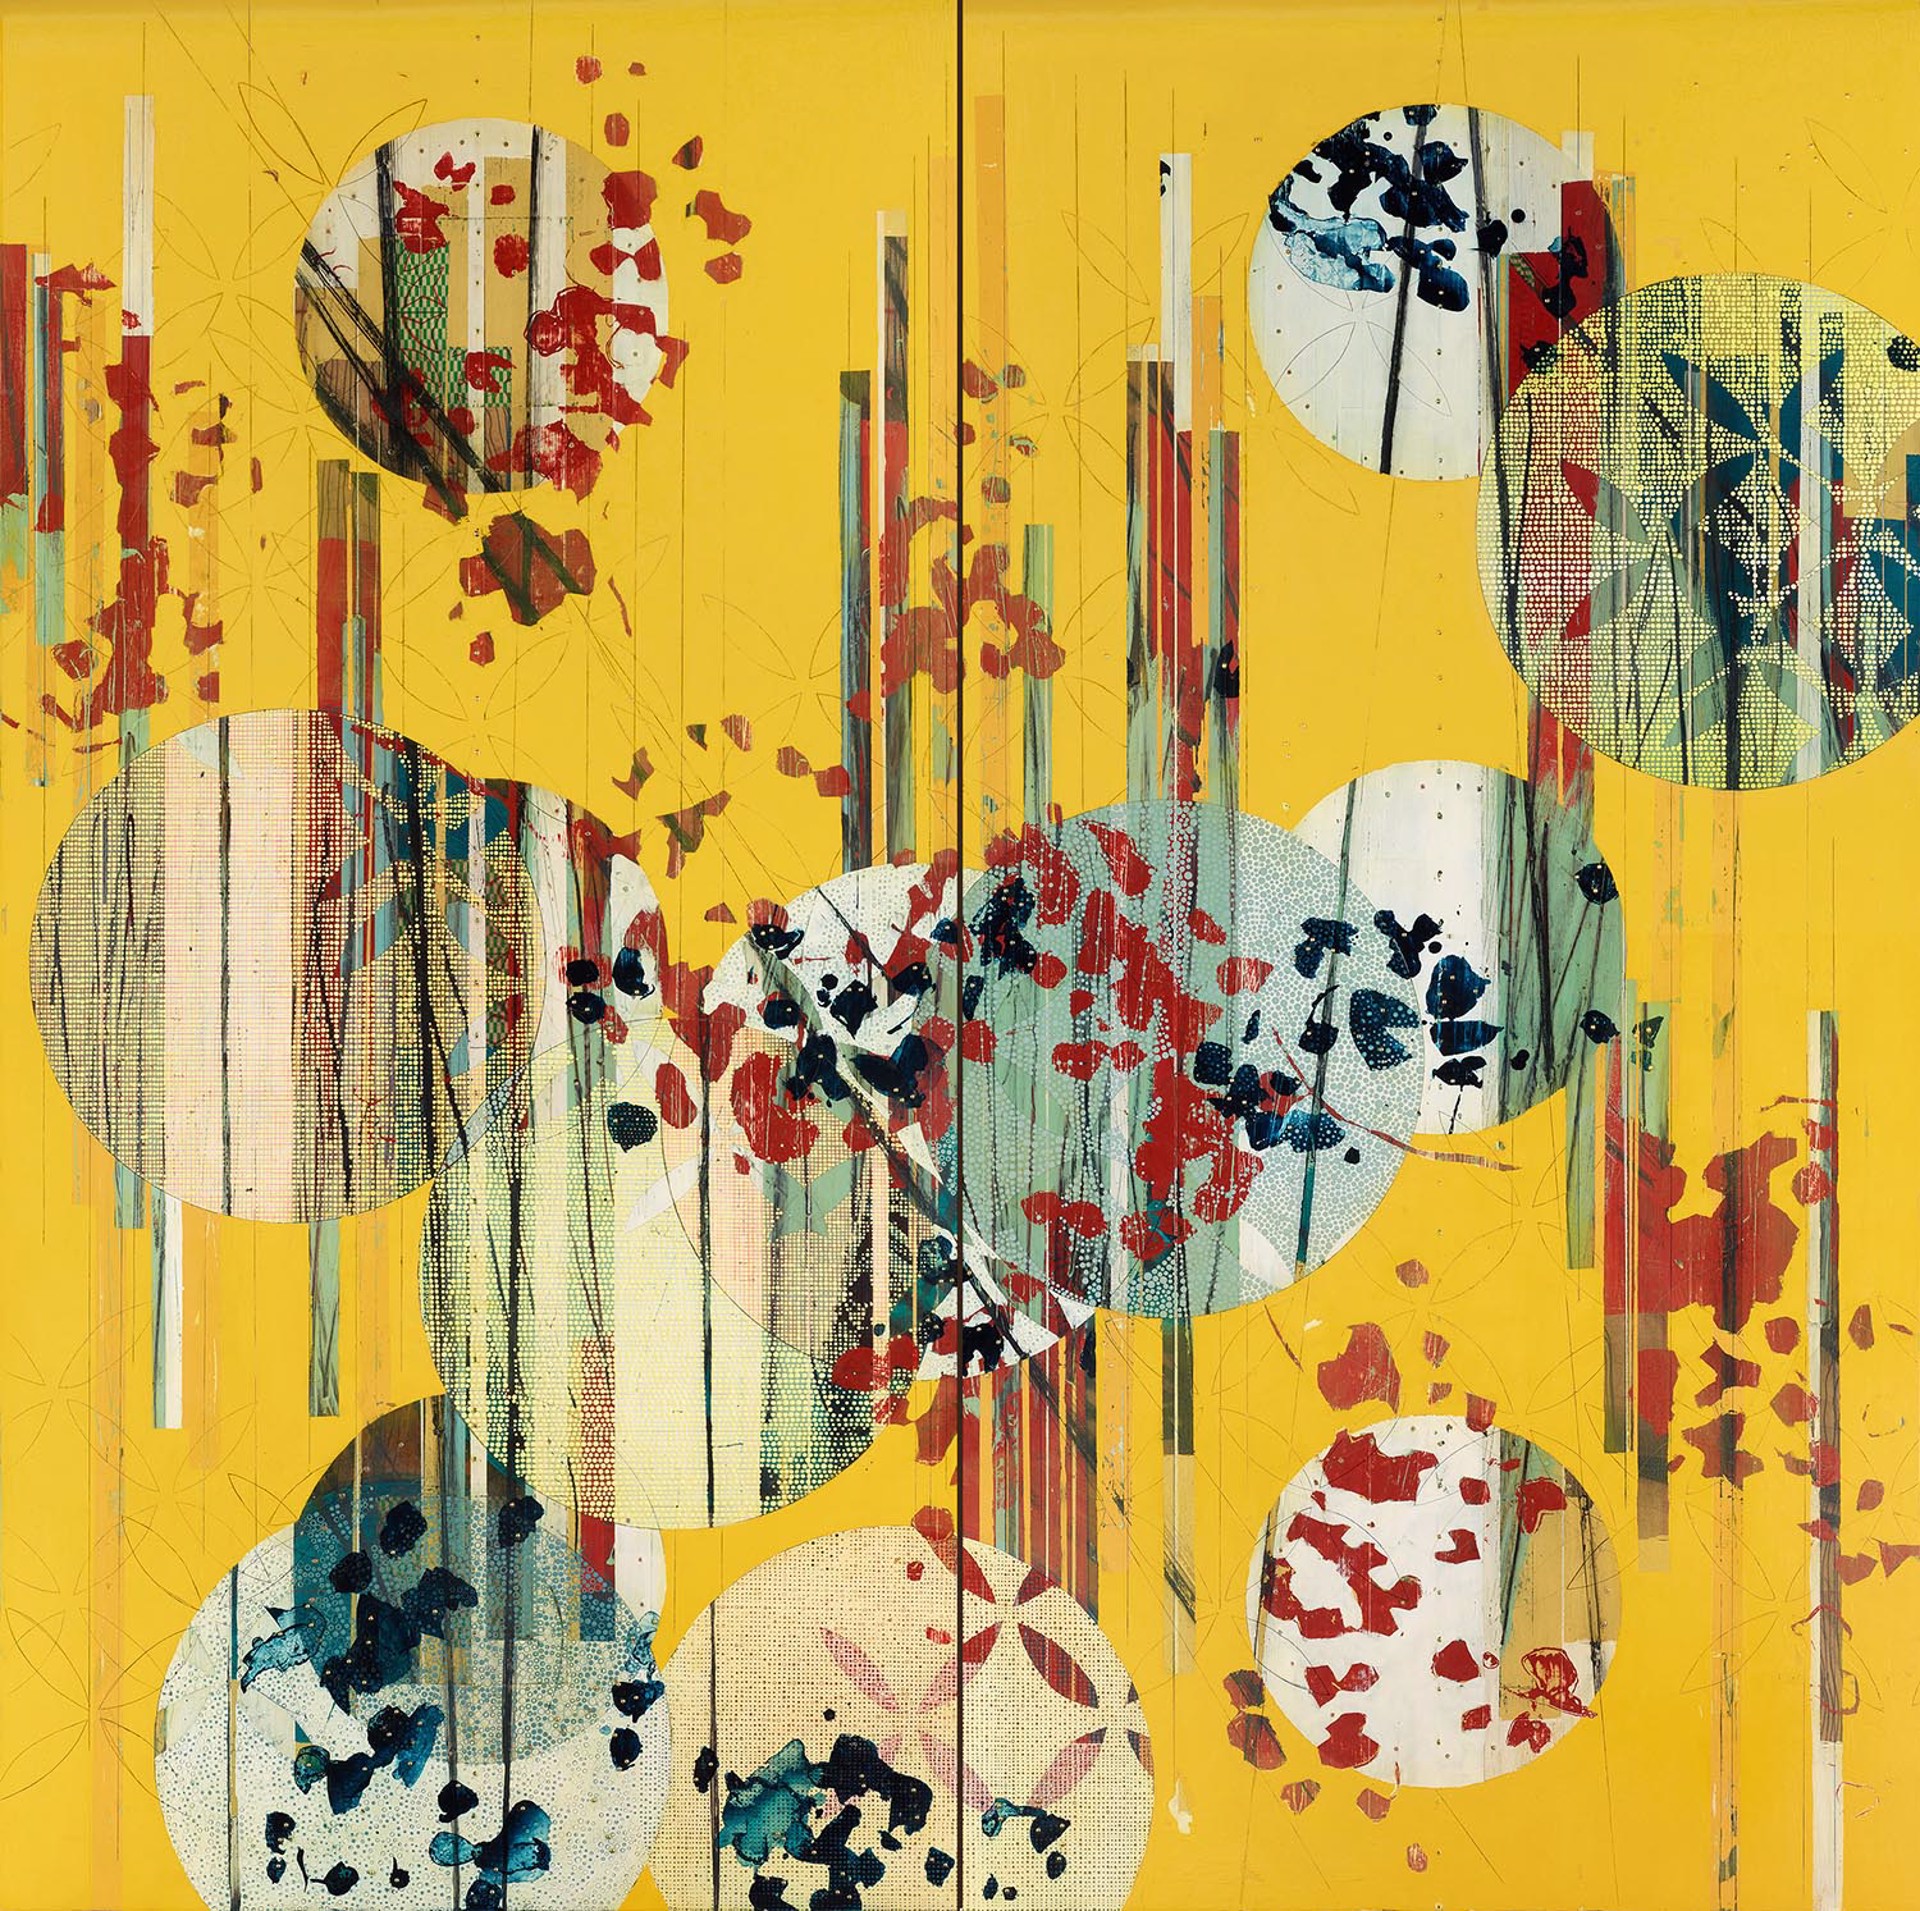 An Abstract Yellow Painting With Circles And Aspen Features By Nina Tichava At Gallery Wild